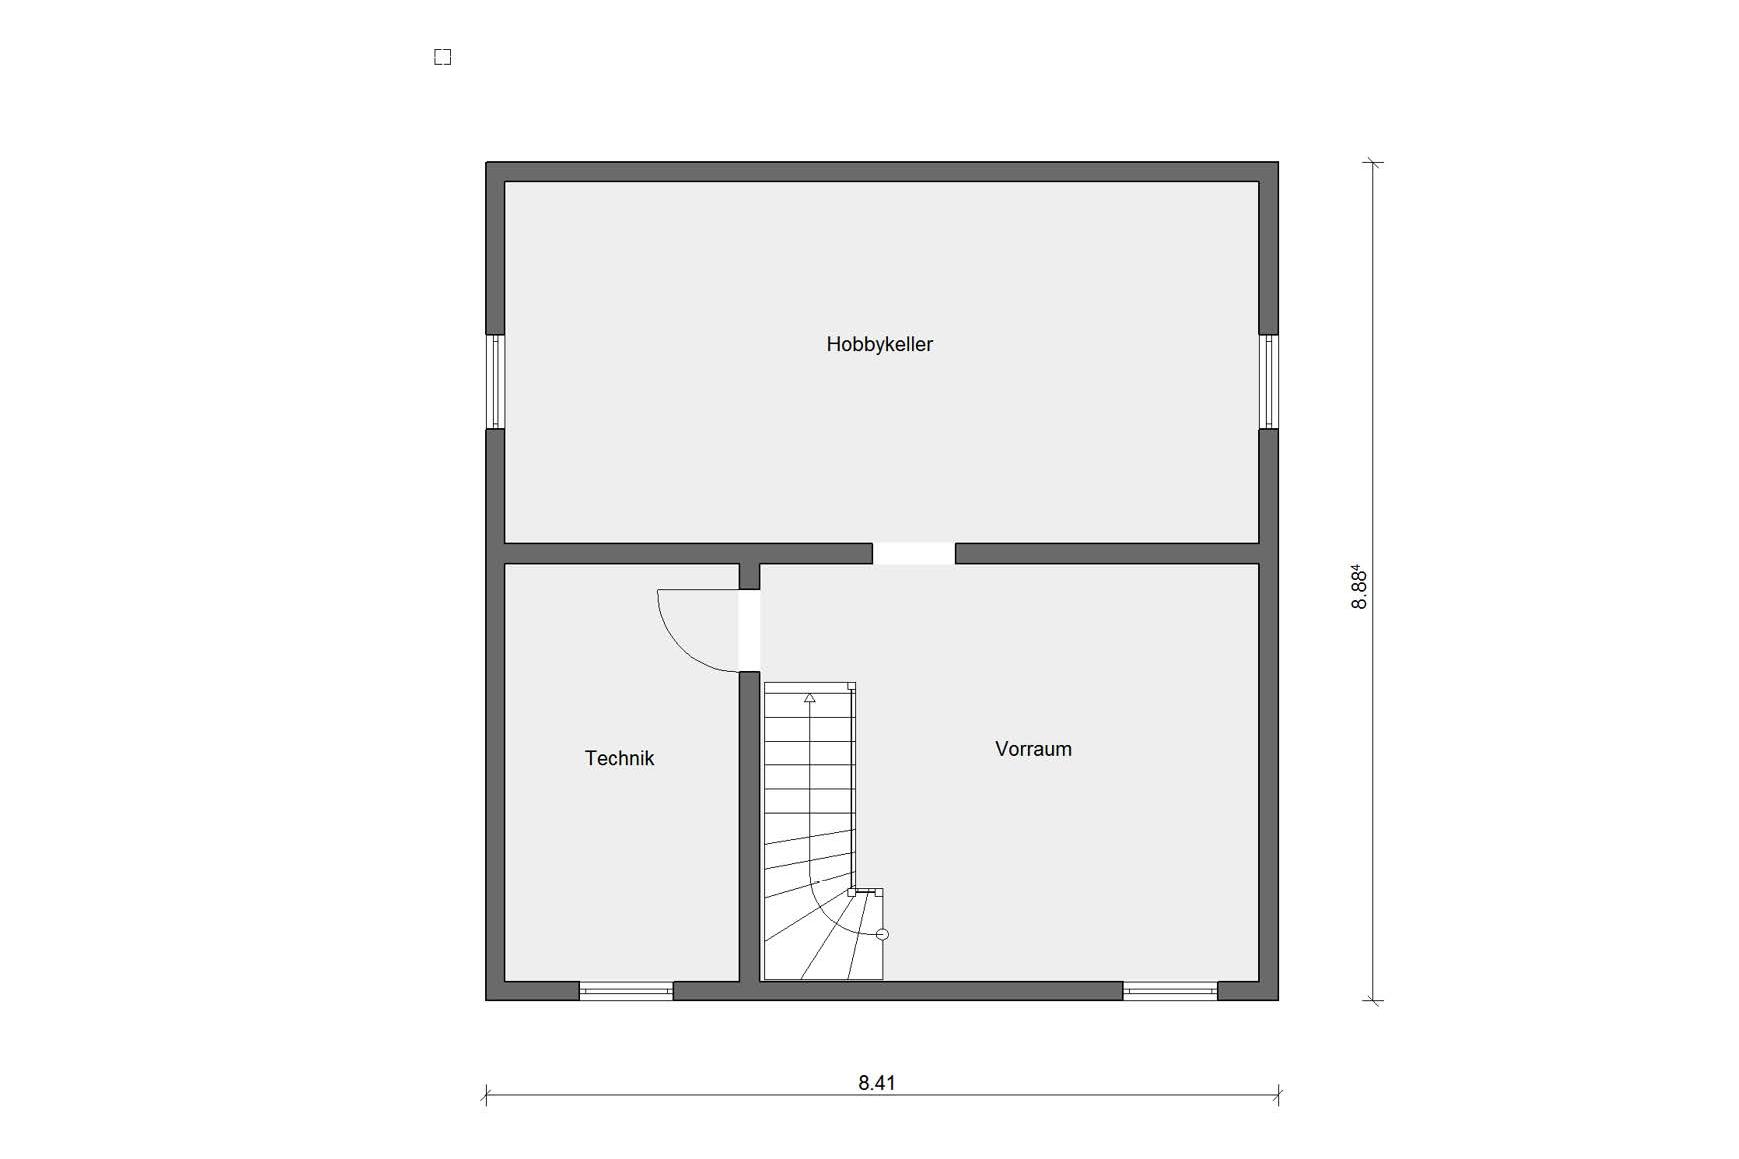 Basement floor plan E 15-128.3 Houses with offset single-pitch roof